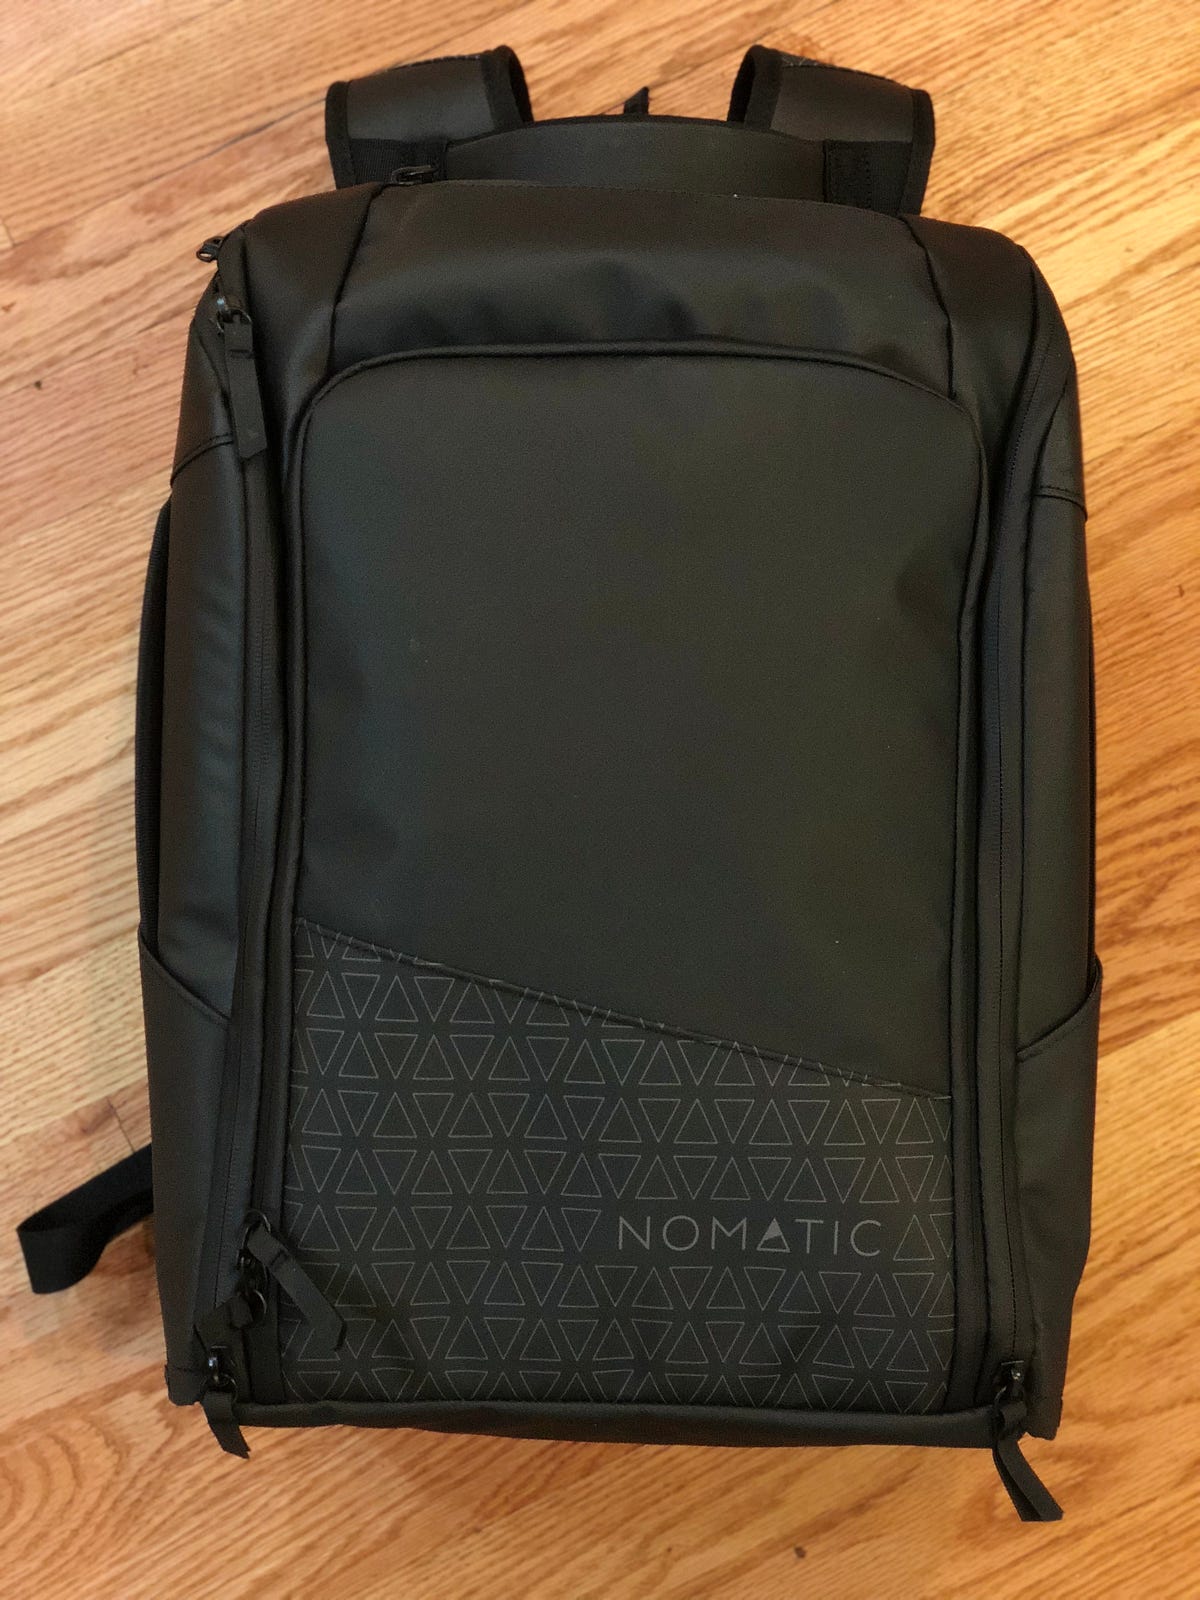 An honest review of the Nomatic Travel Pack | by Savan Kong | Medium